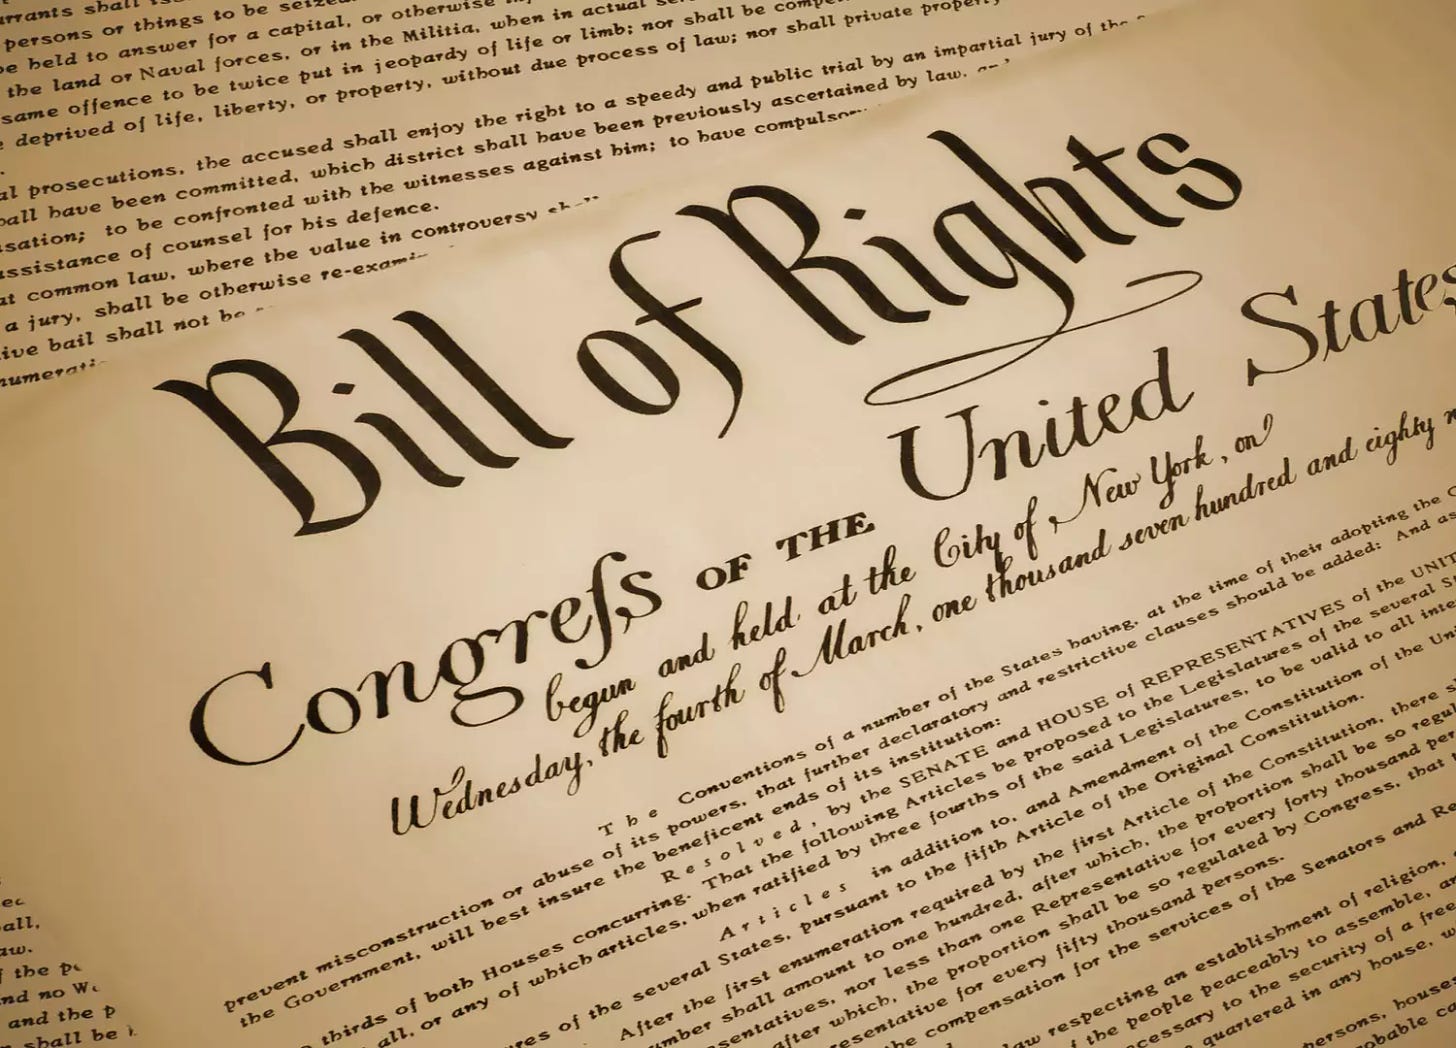 Replica of the United States Bill of Rights, documenting the first 10 amendments to the US Constitution.